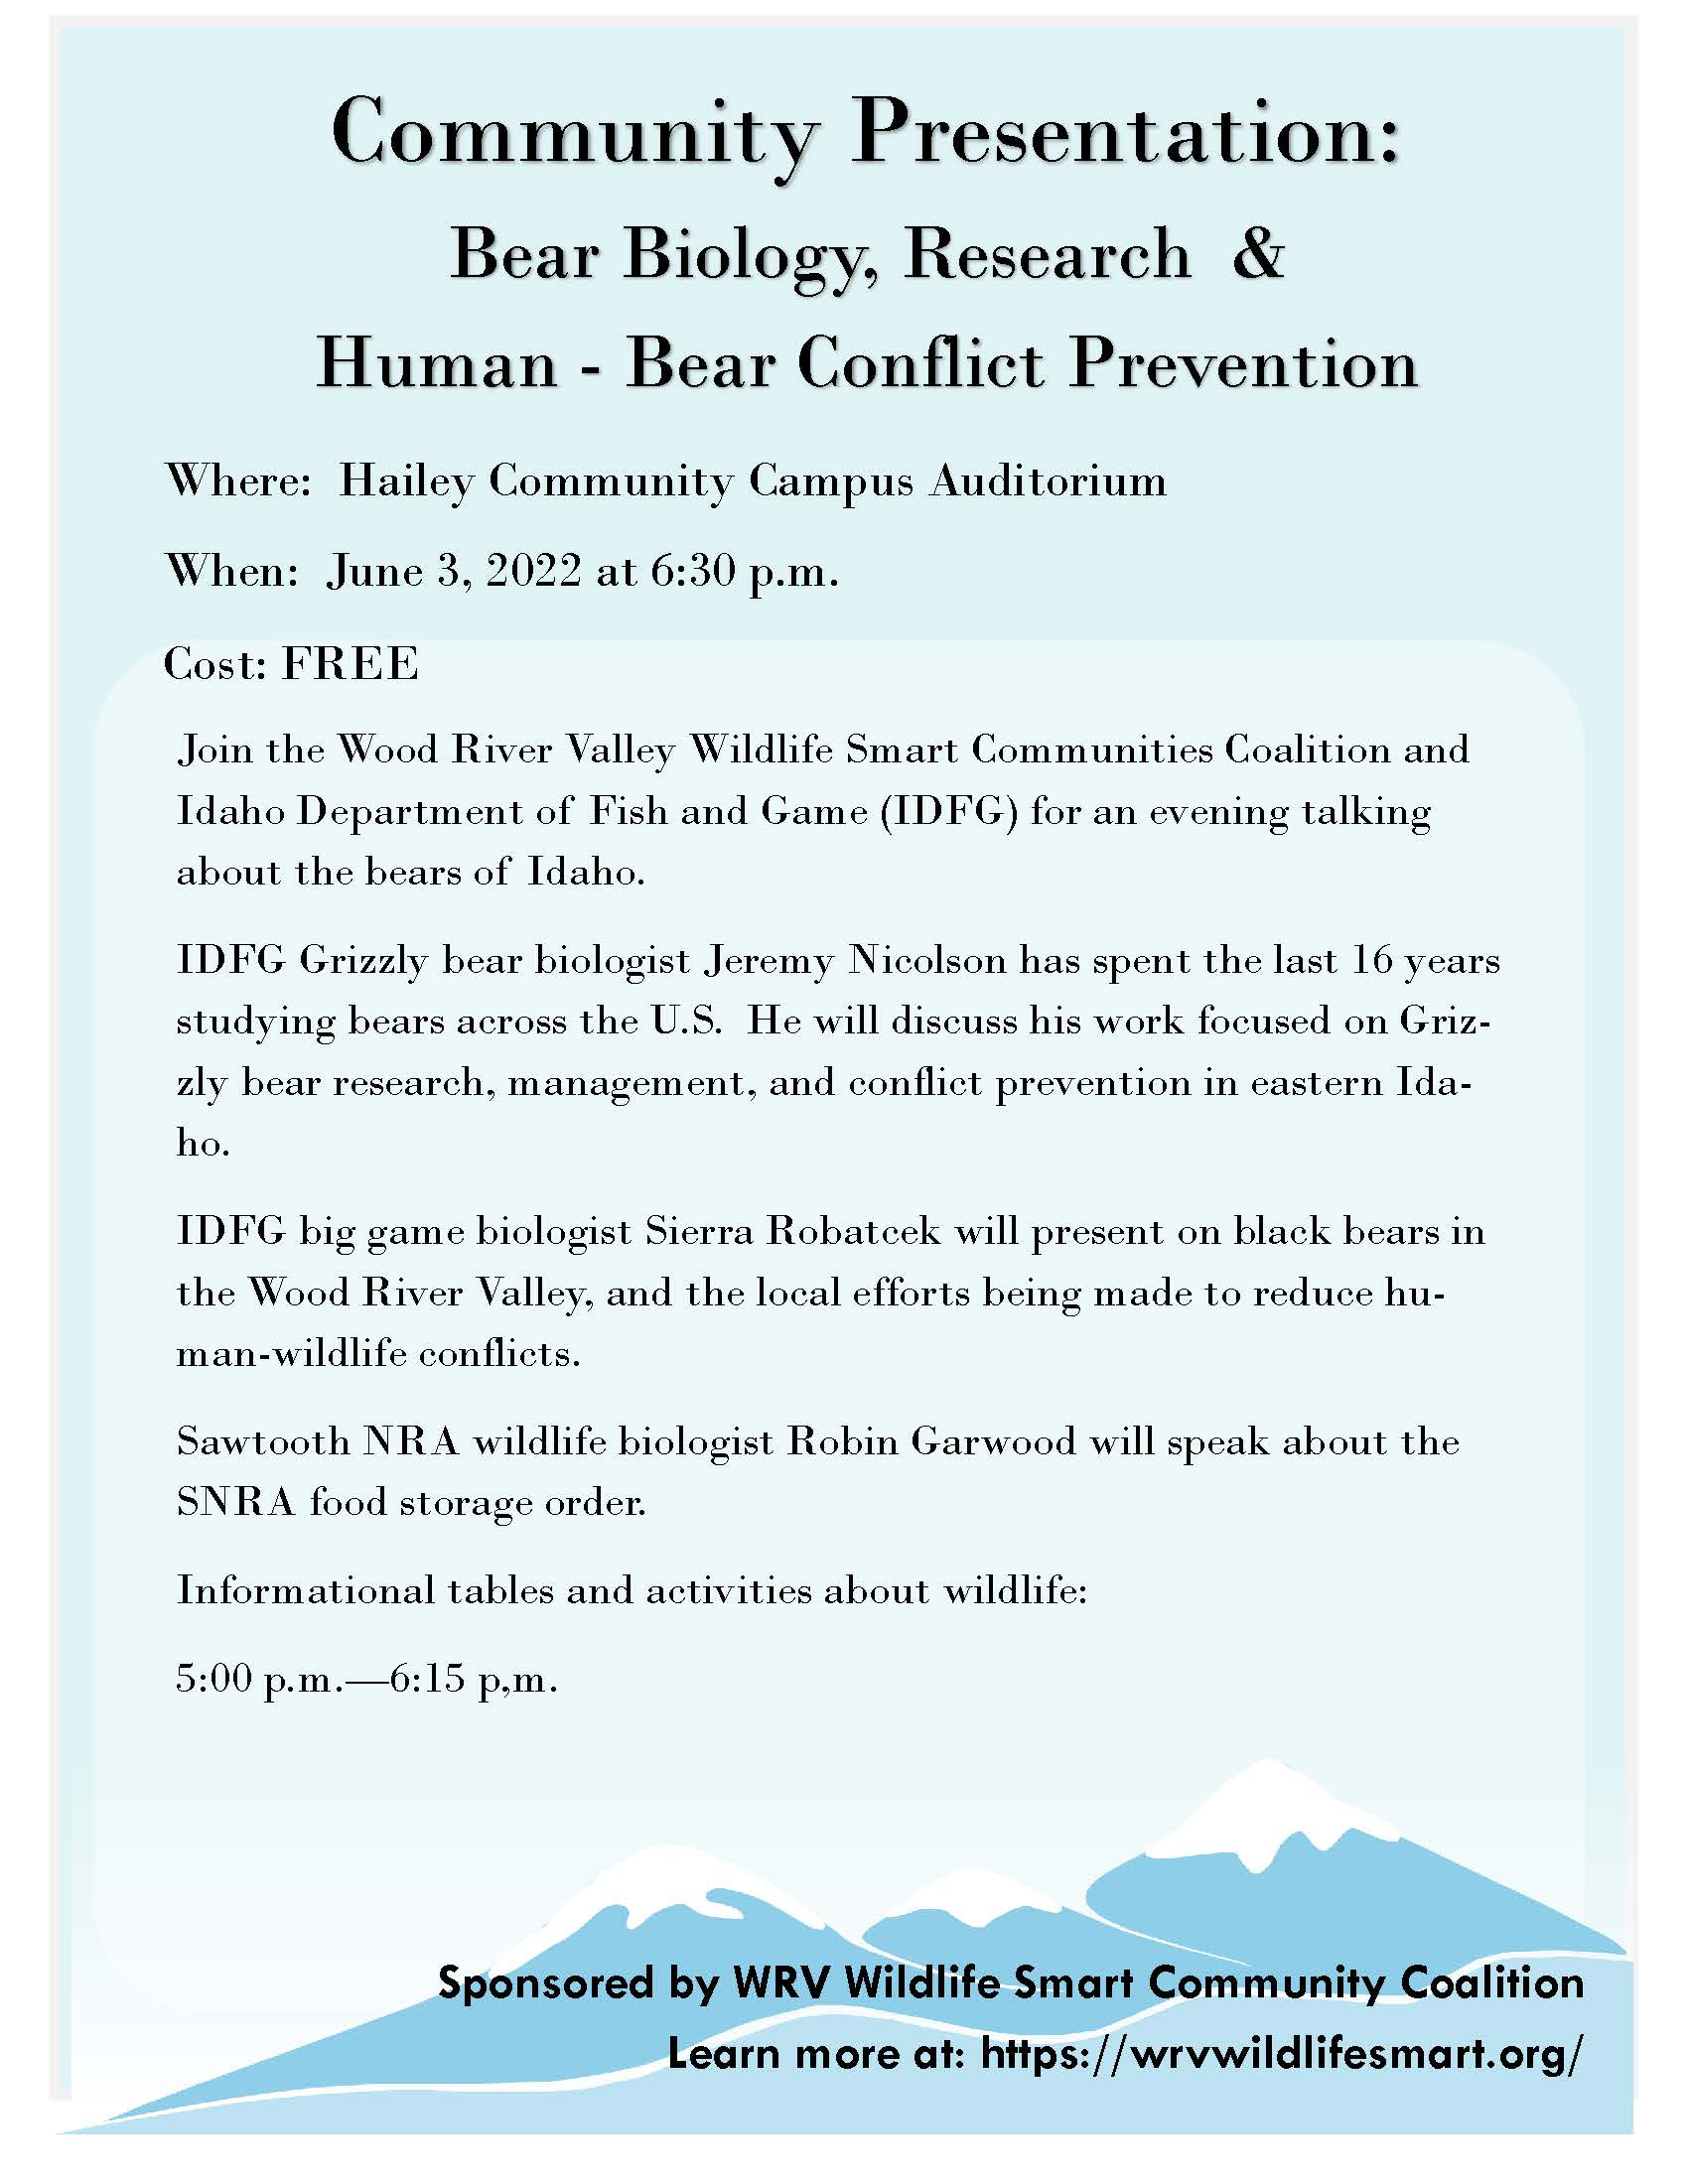 Community Presentation: Bear Biology, Research & Human – Bear Conflict Prevention